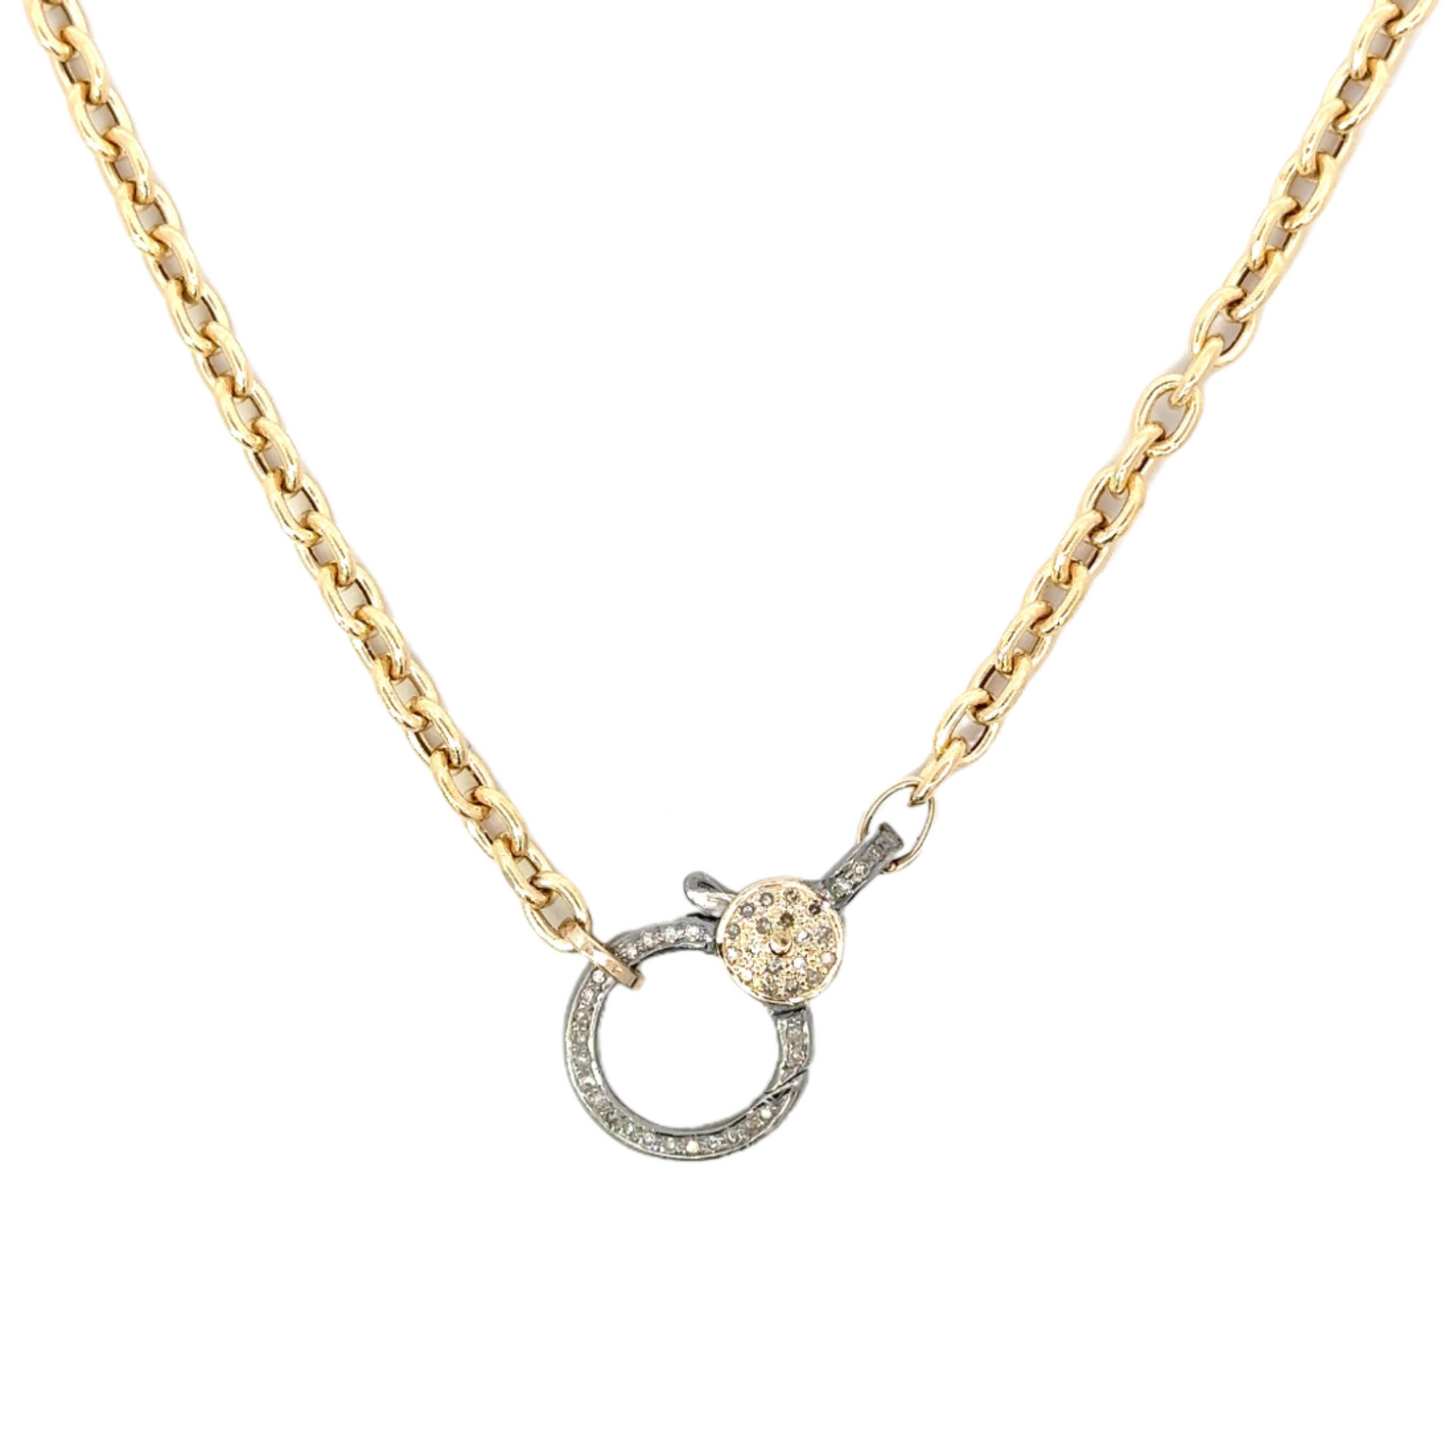 Yellow Gold Oval Chain Necklace with Large Mixed Metal Pave Lobster